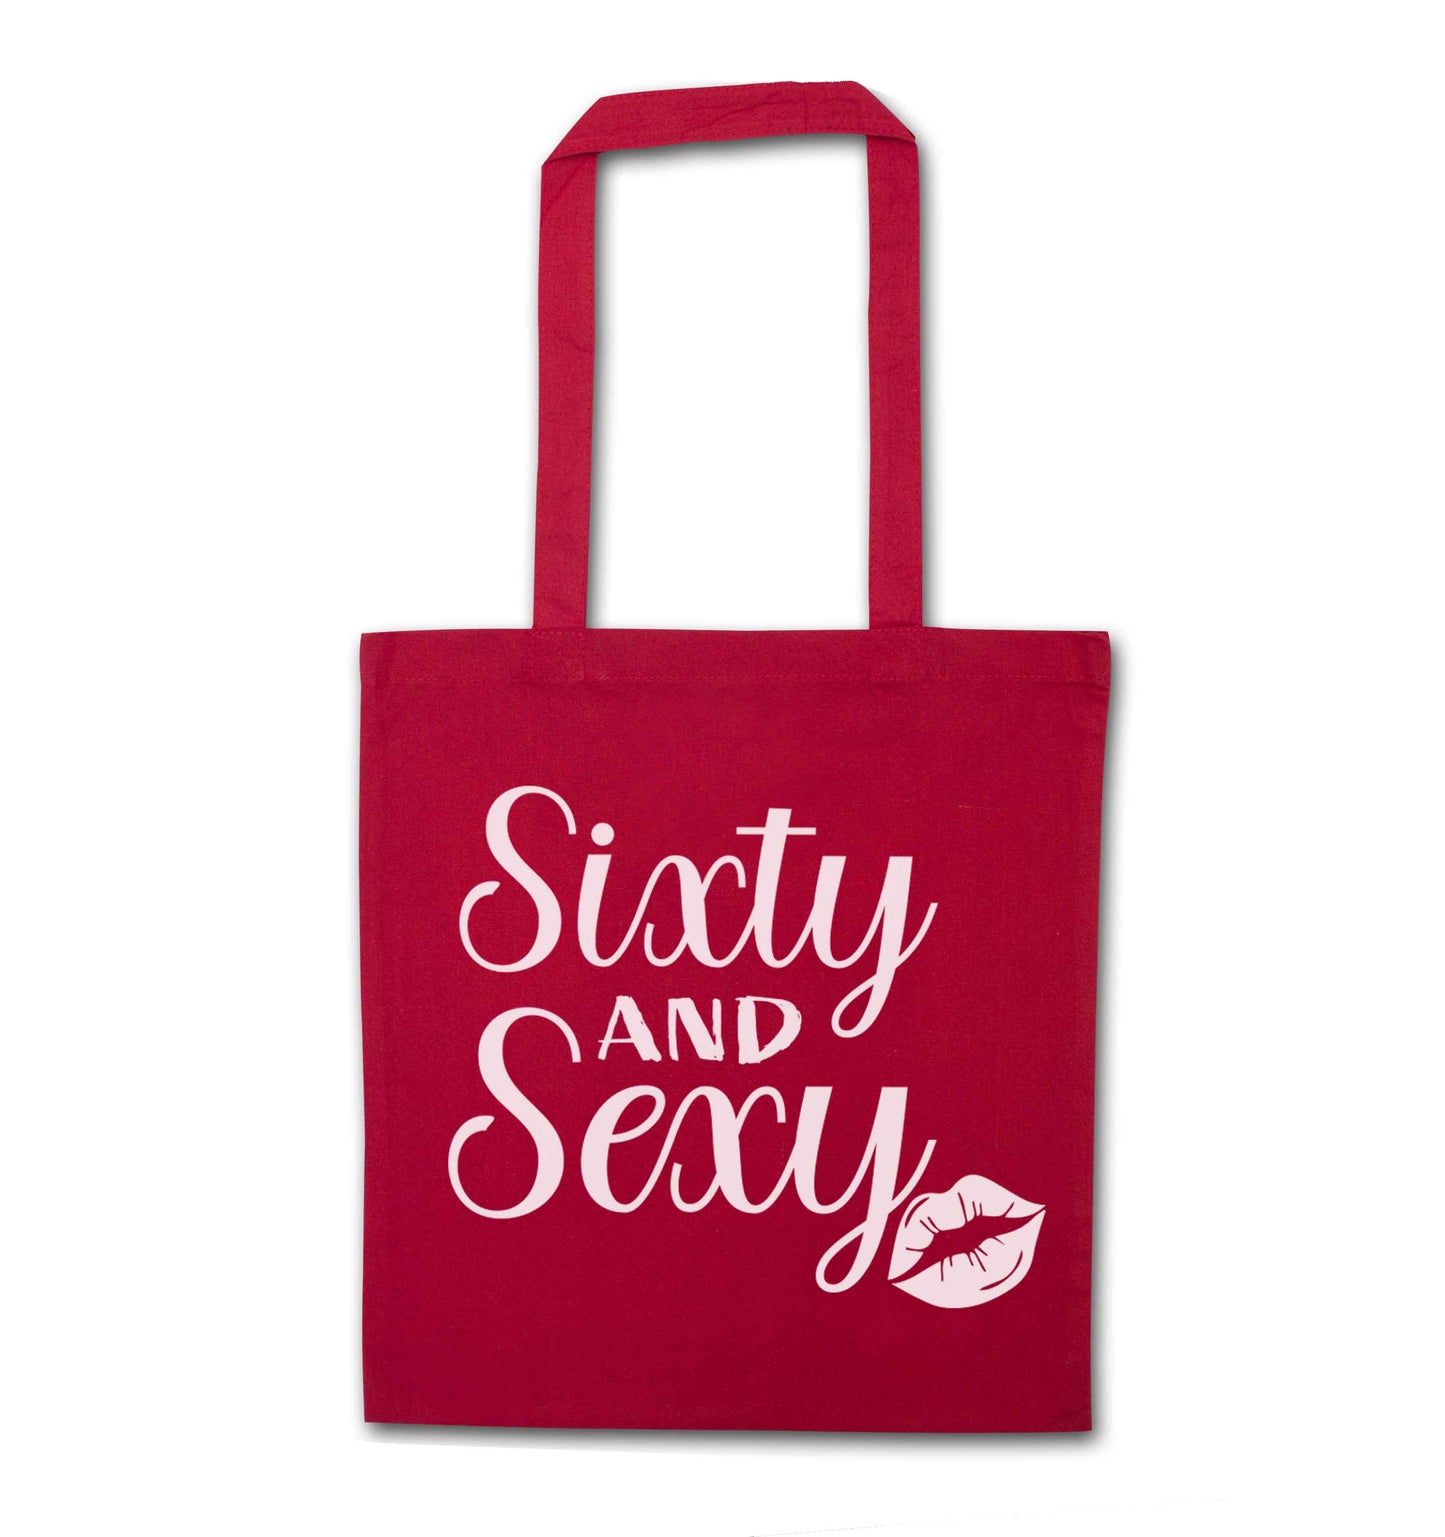 Sixty and sexy red tote bag